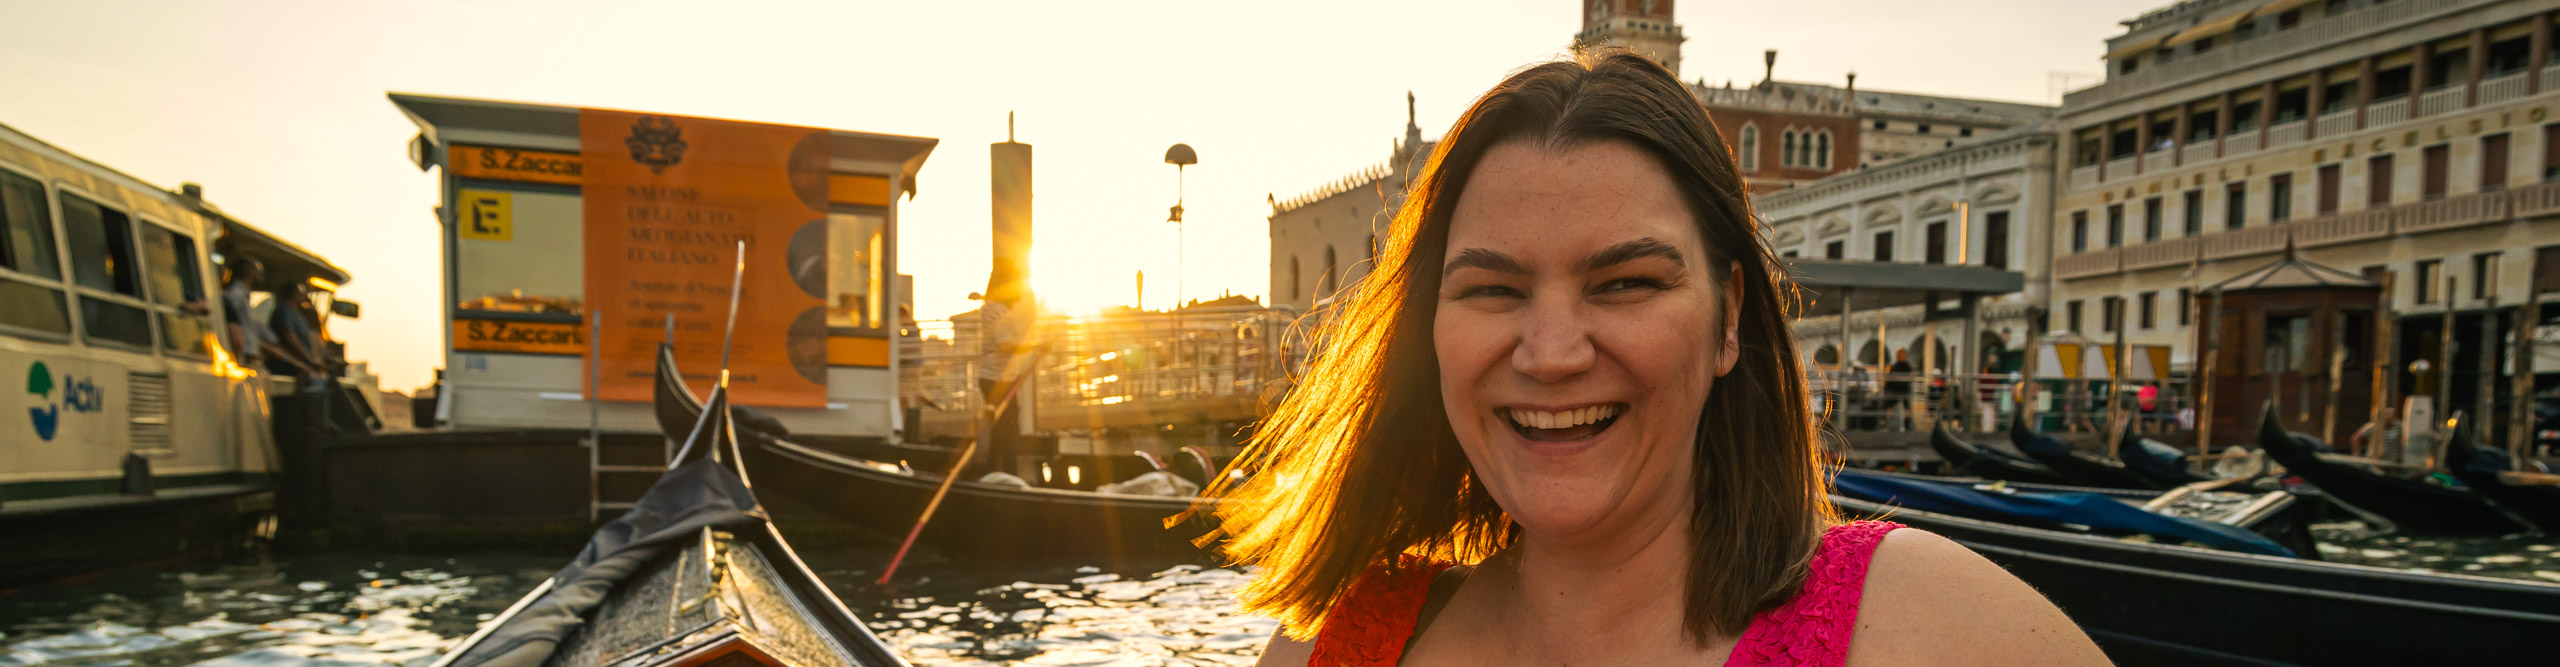 Woman in a red dress laughing on a gondola at sunset on the canals of Venice, Italy 